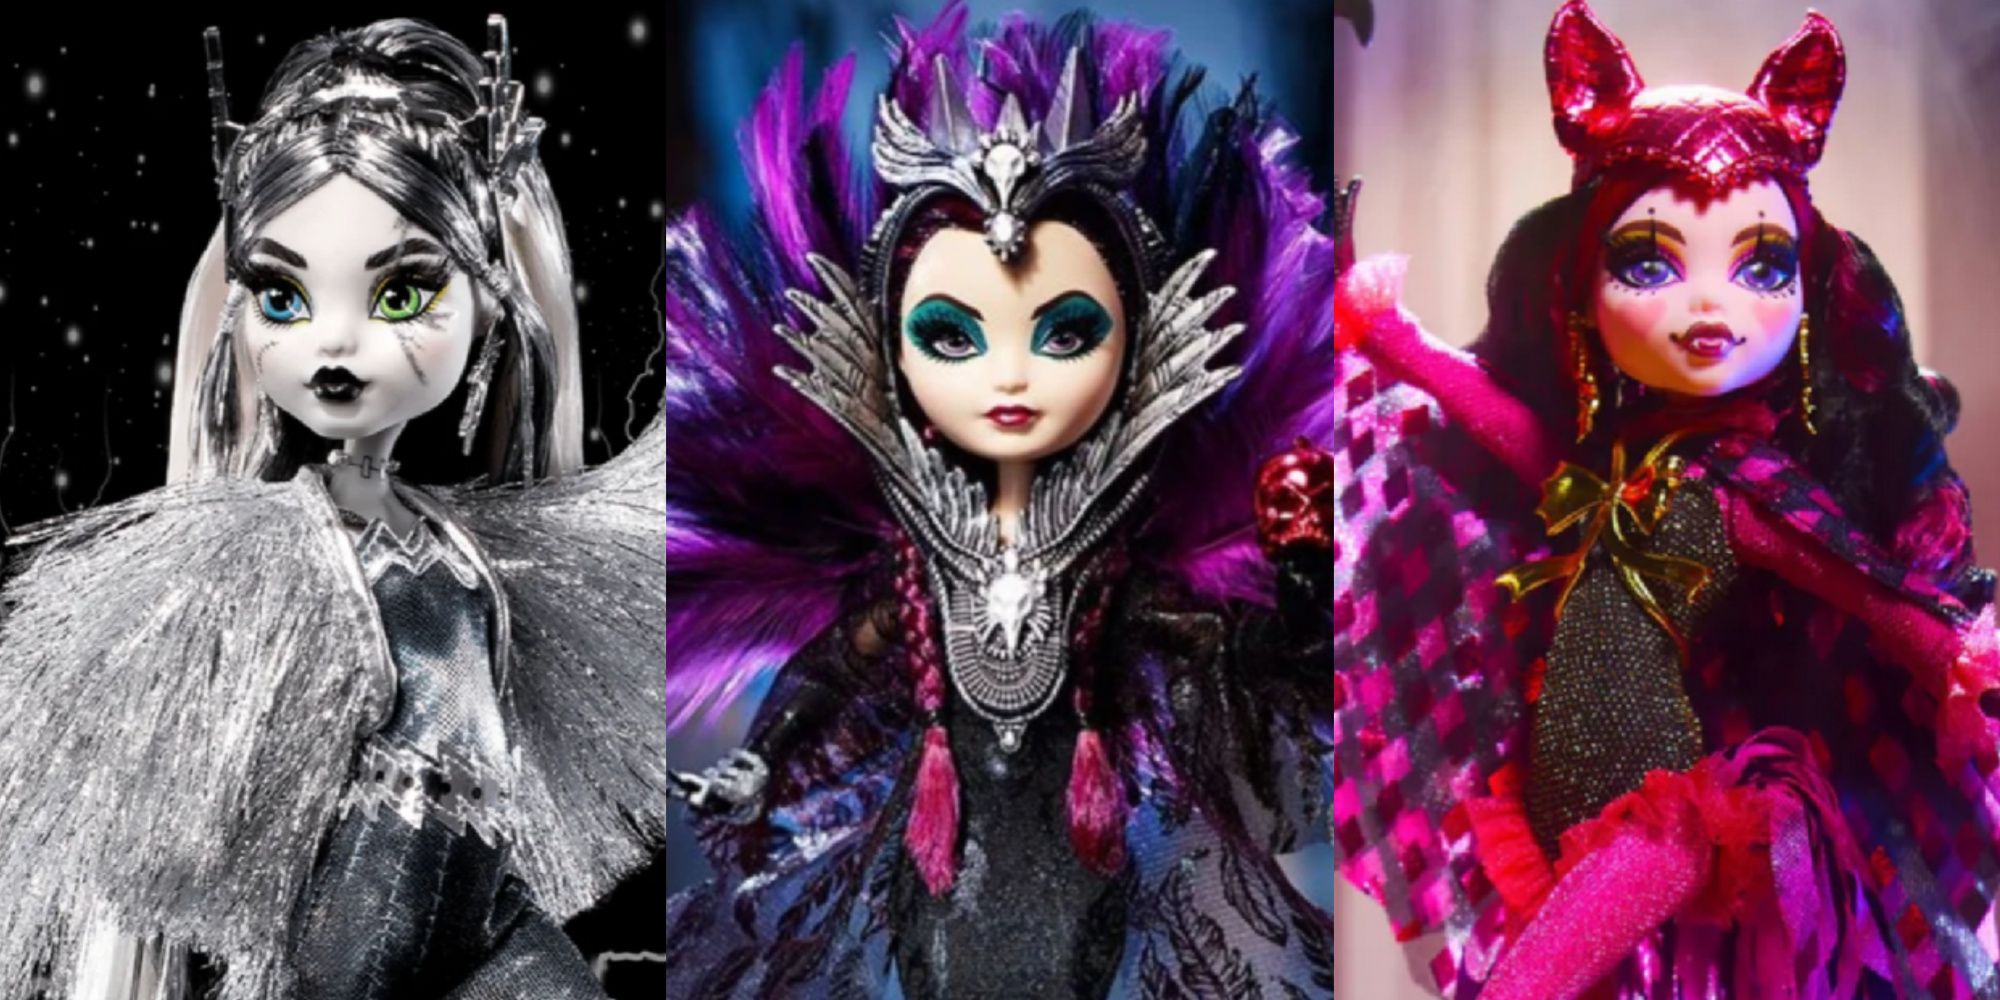 Cover Image for X Best Comic Con-Exclusive Mattel Dolls Featuring Frankie Stein, Raven Queen, and Draculaura